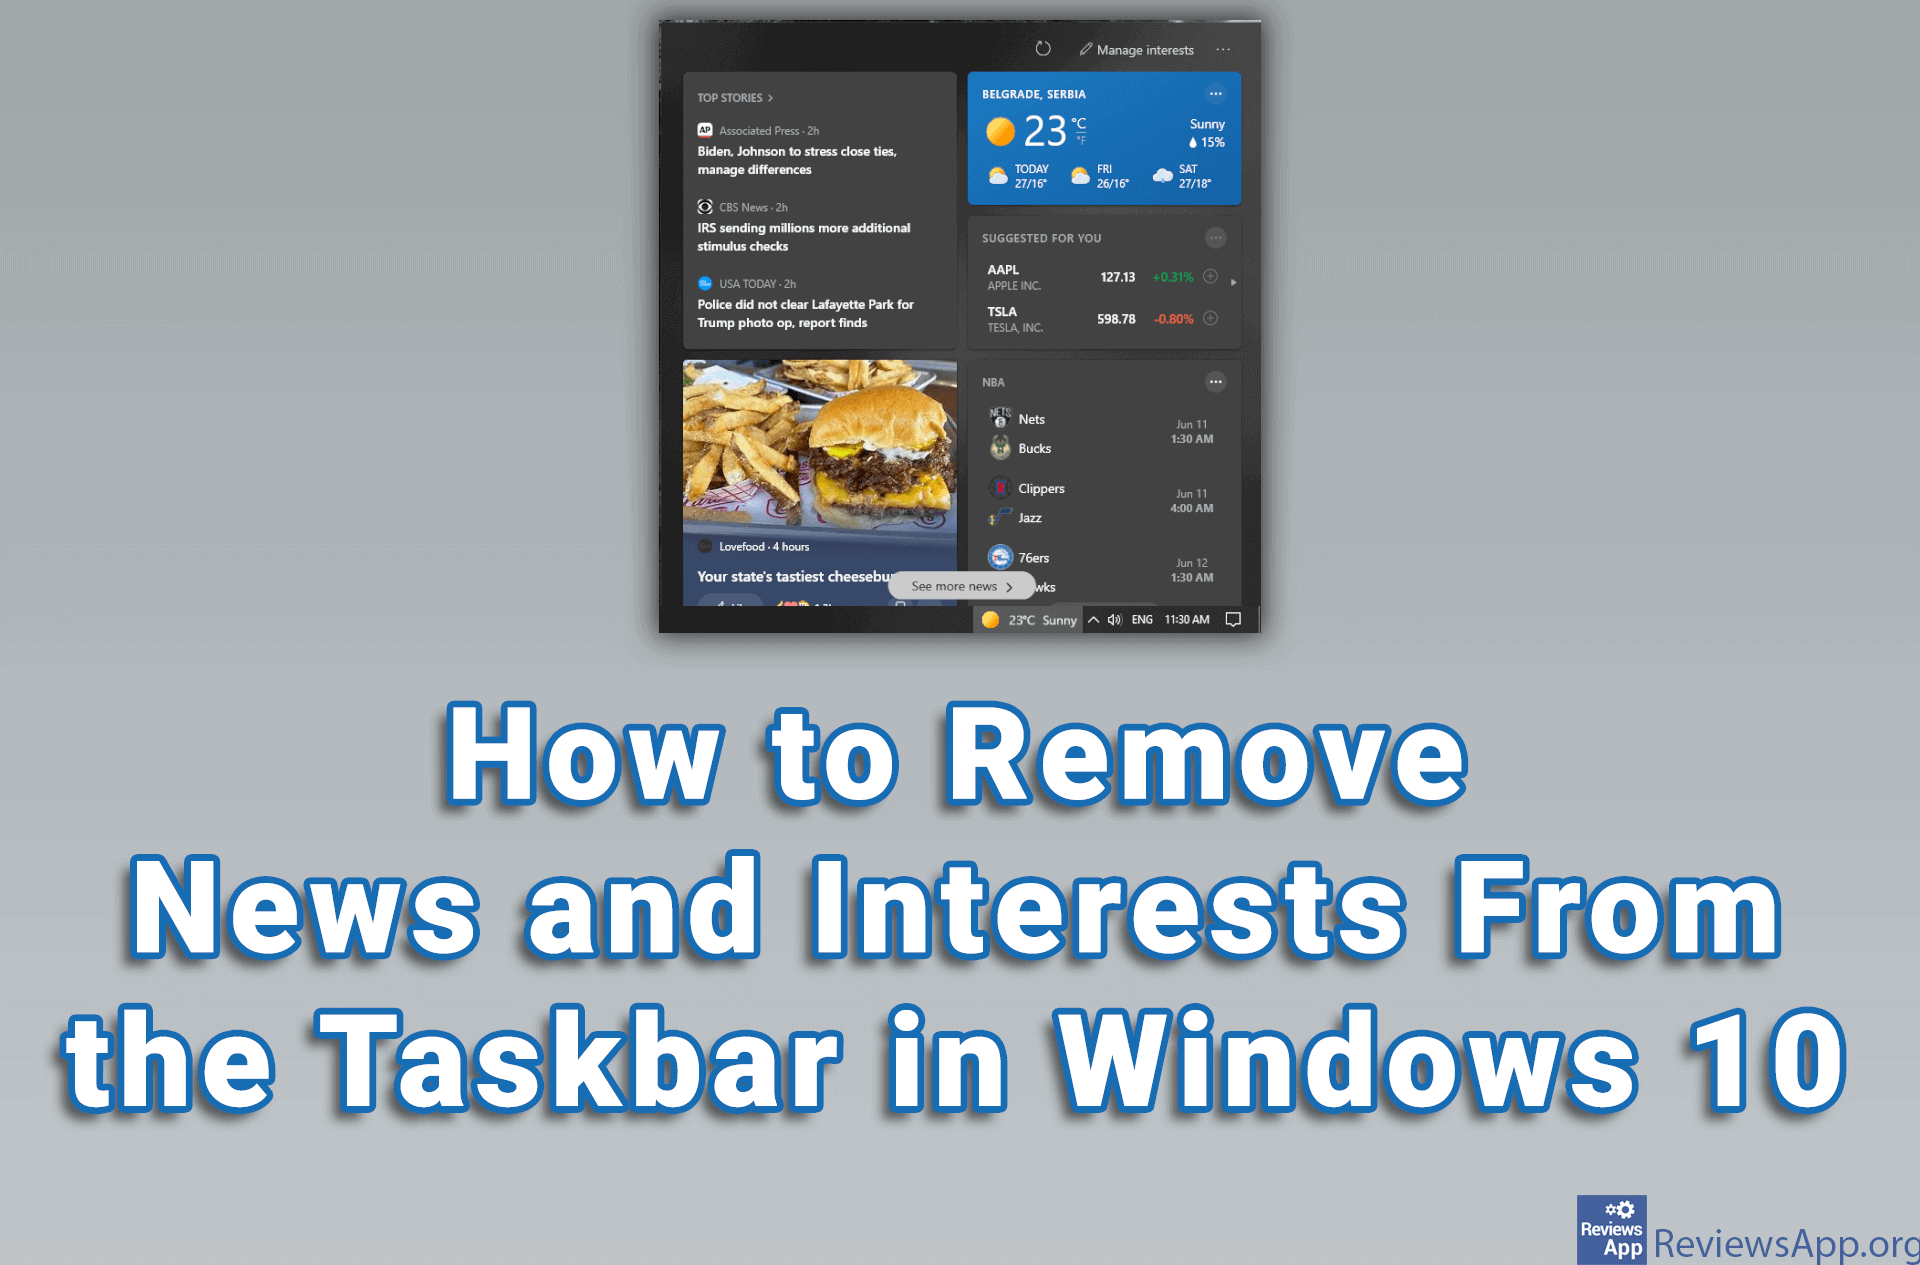 How to Remove News and Interests From the Taskbar in Windows 10